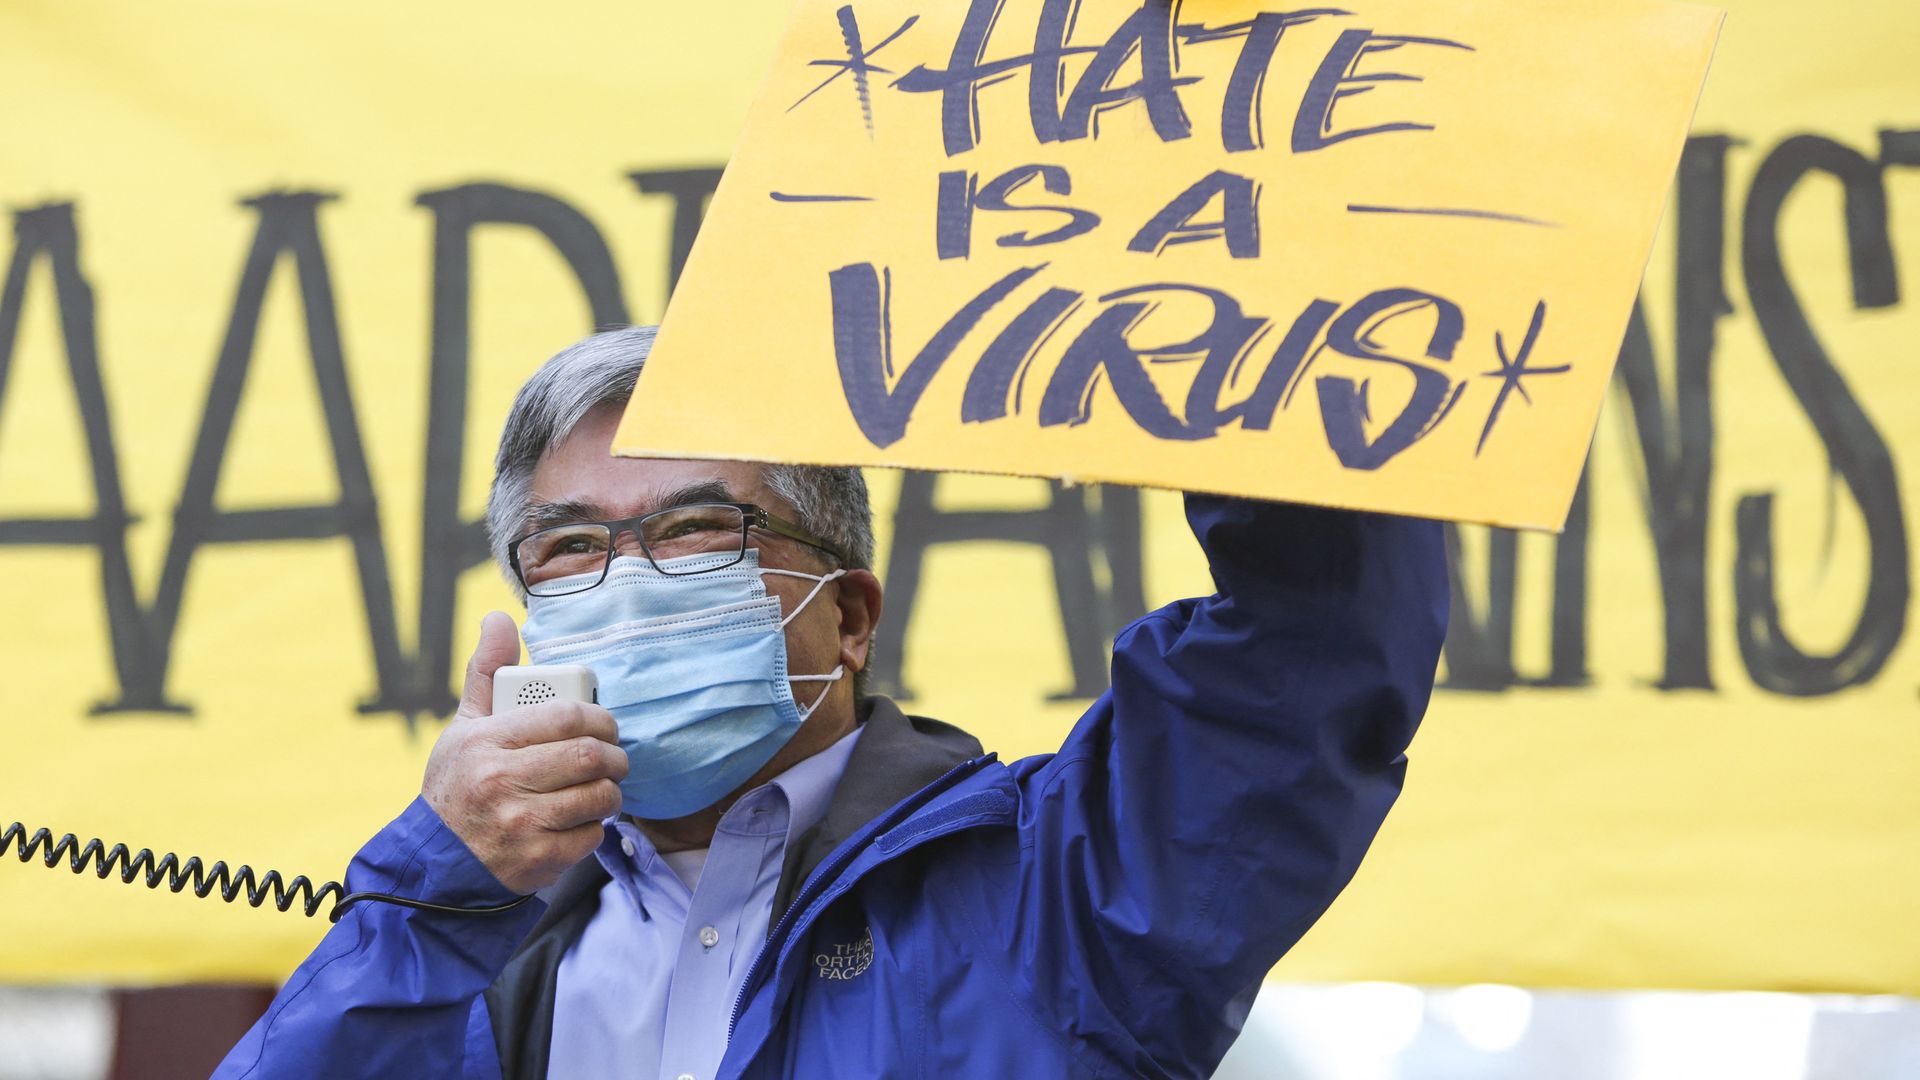 Photo of a masked Gary Locke holding up a yellow sign that says "Hate is a virus"